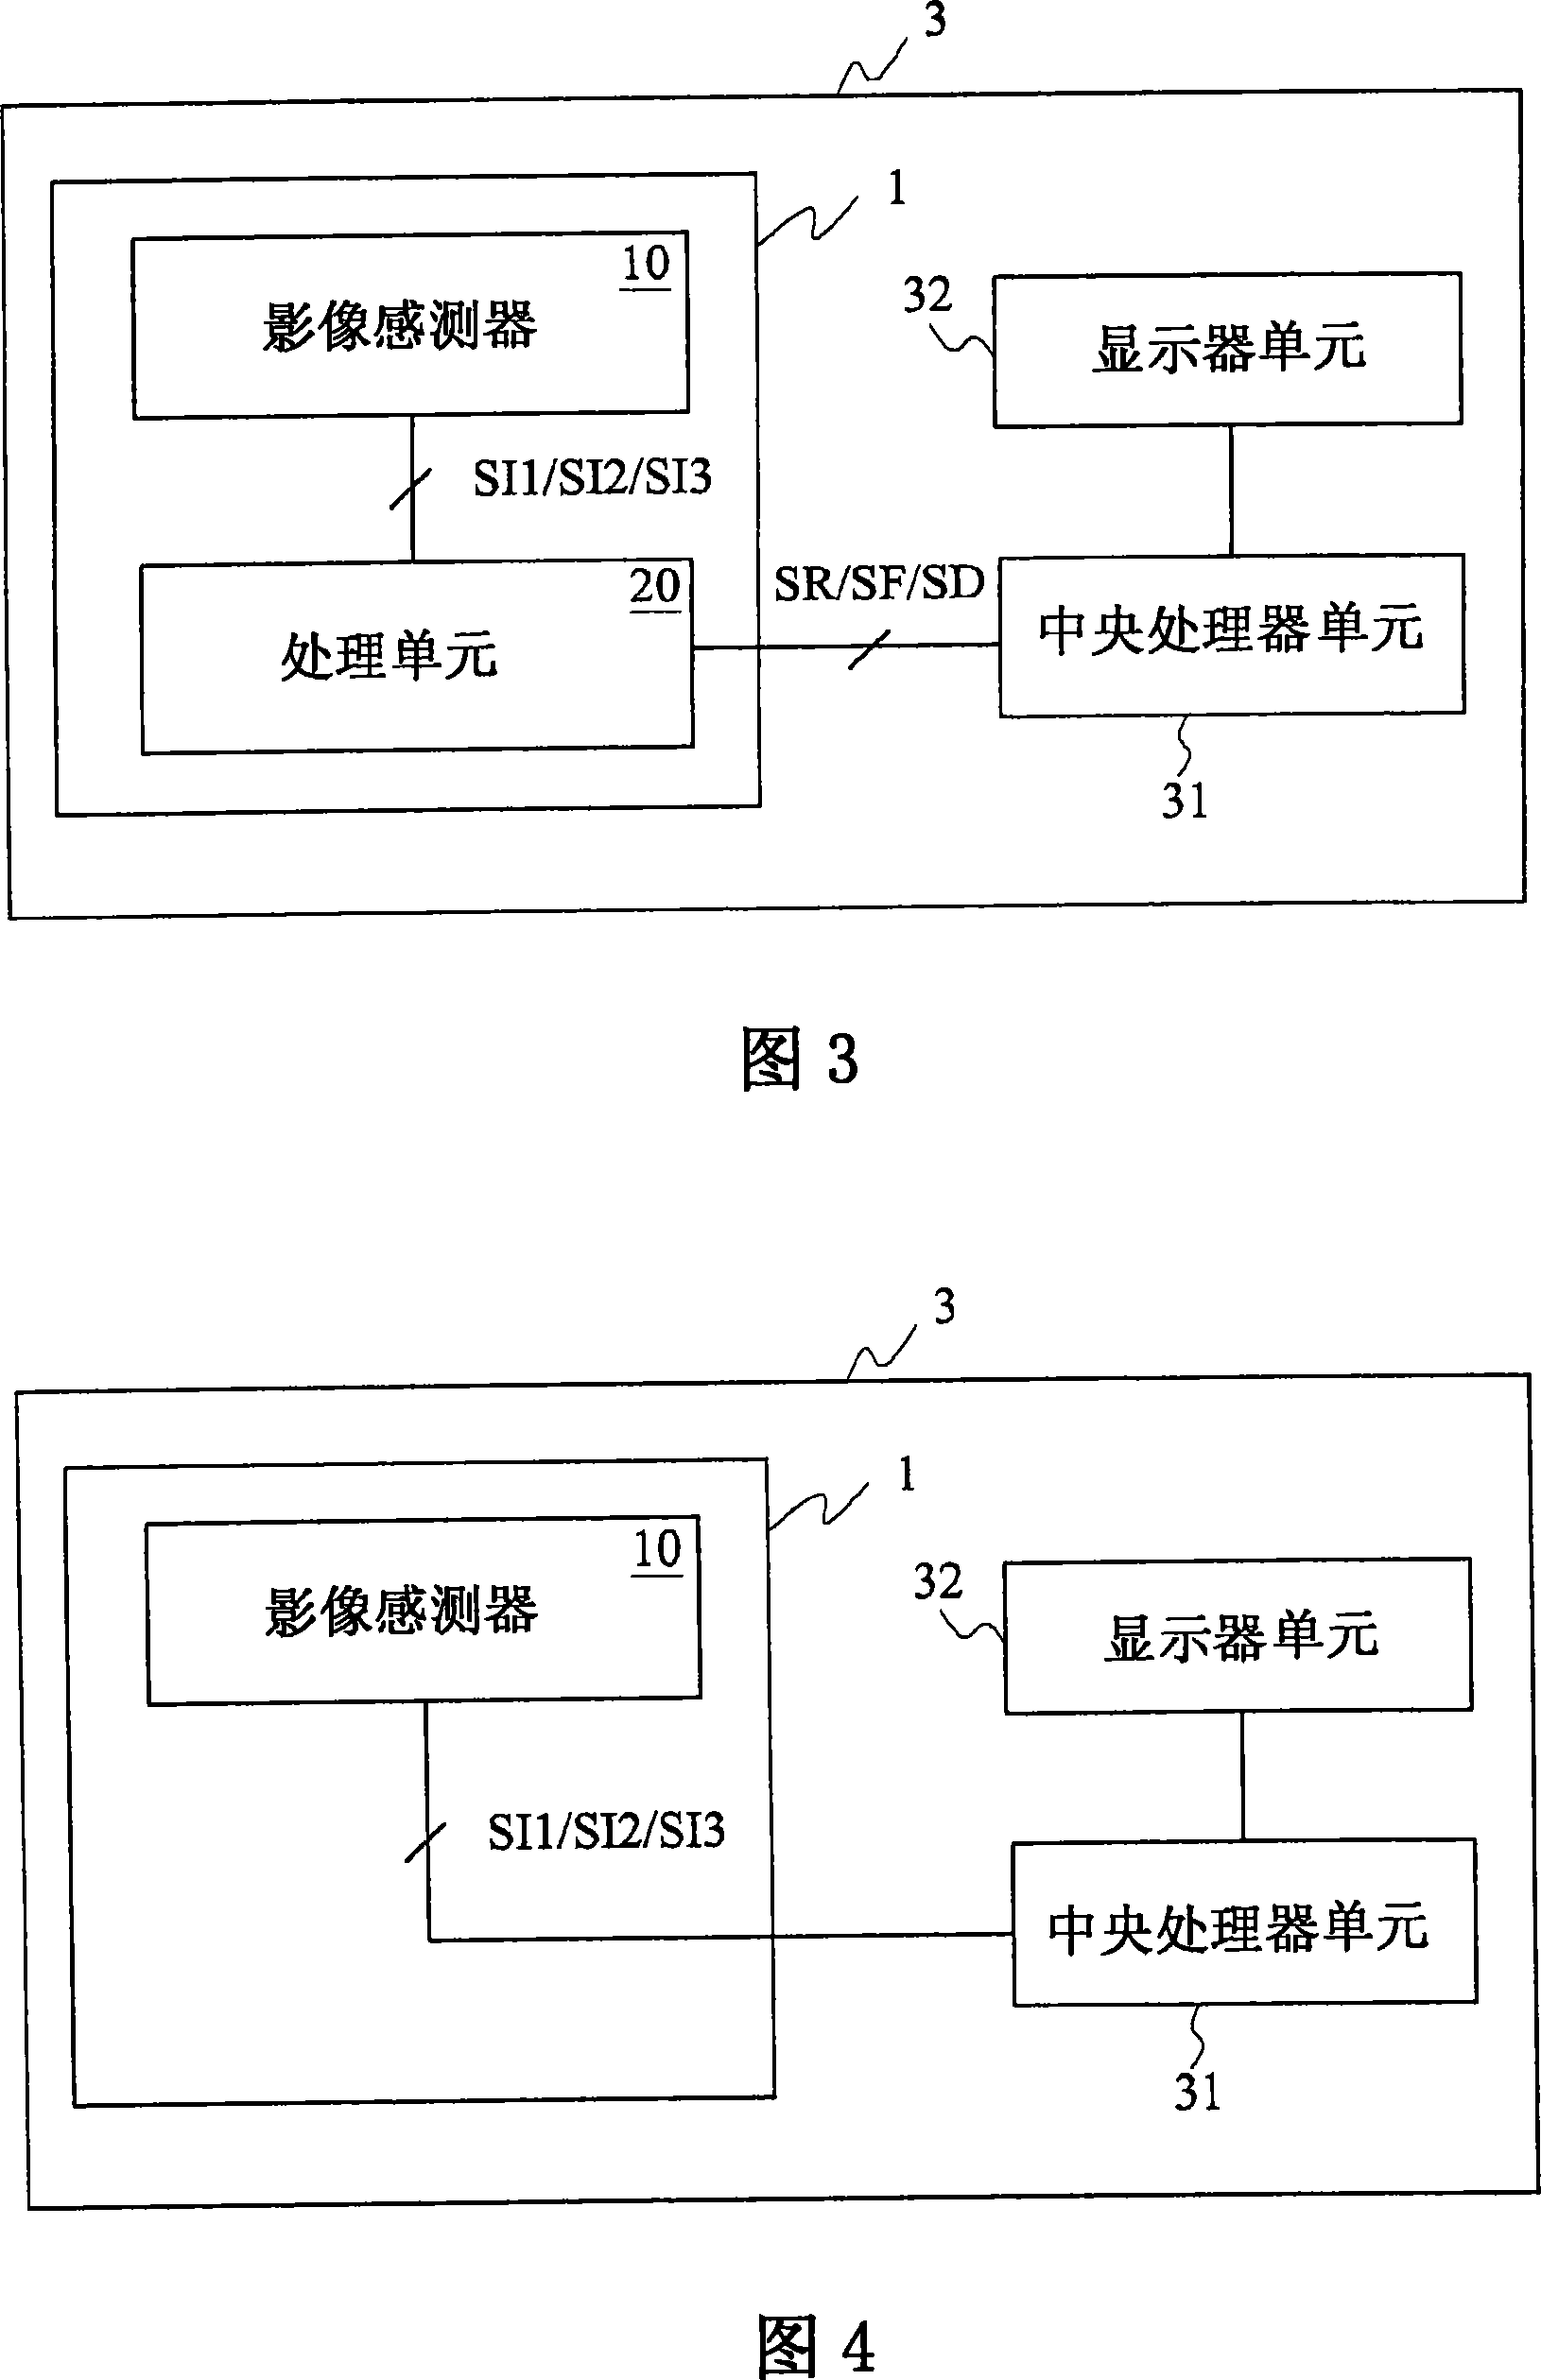 Image sensing device and electronic device using same